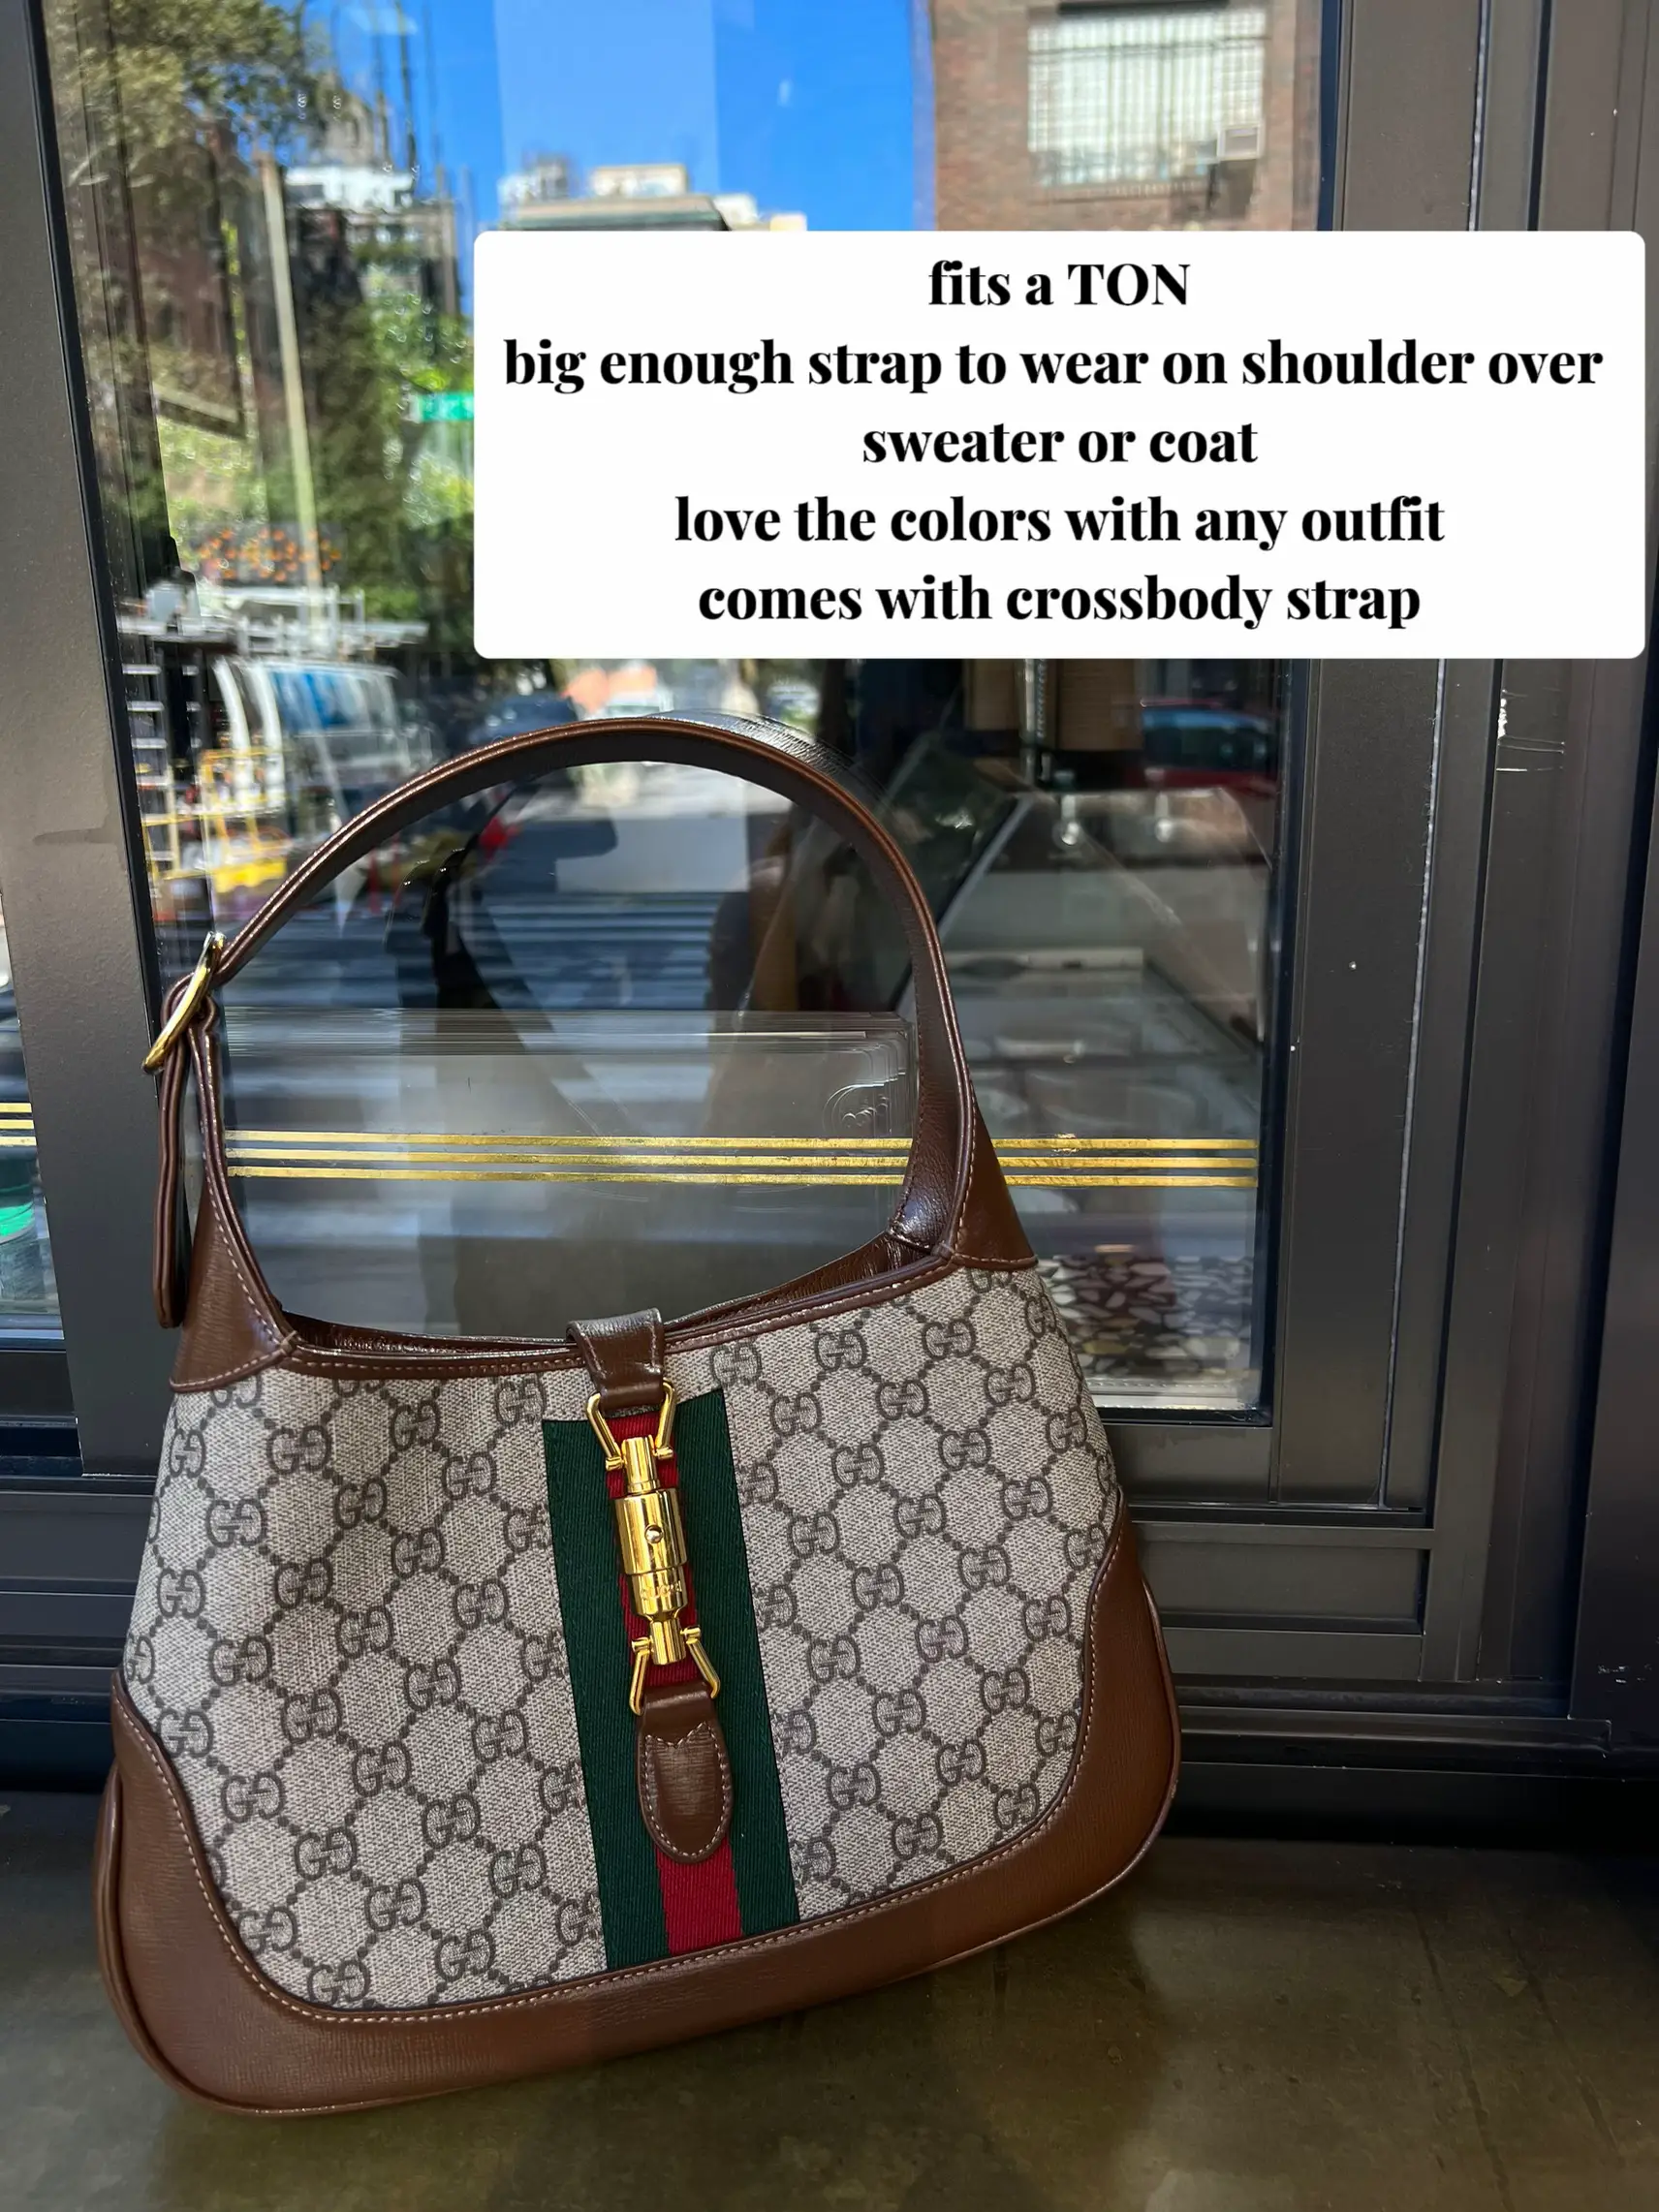 GUCCI JACKIE DESIGNER BAG REVIEW, Gallery posted by Sstephkoutss